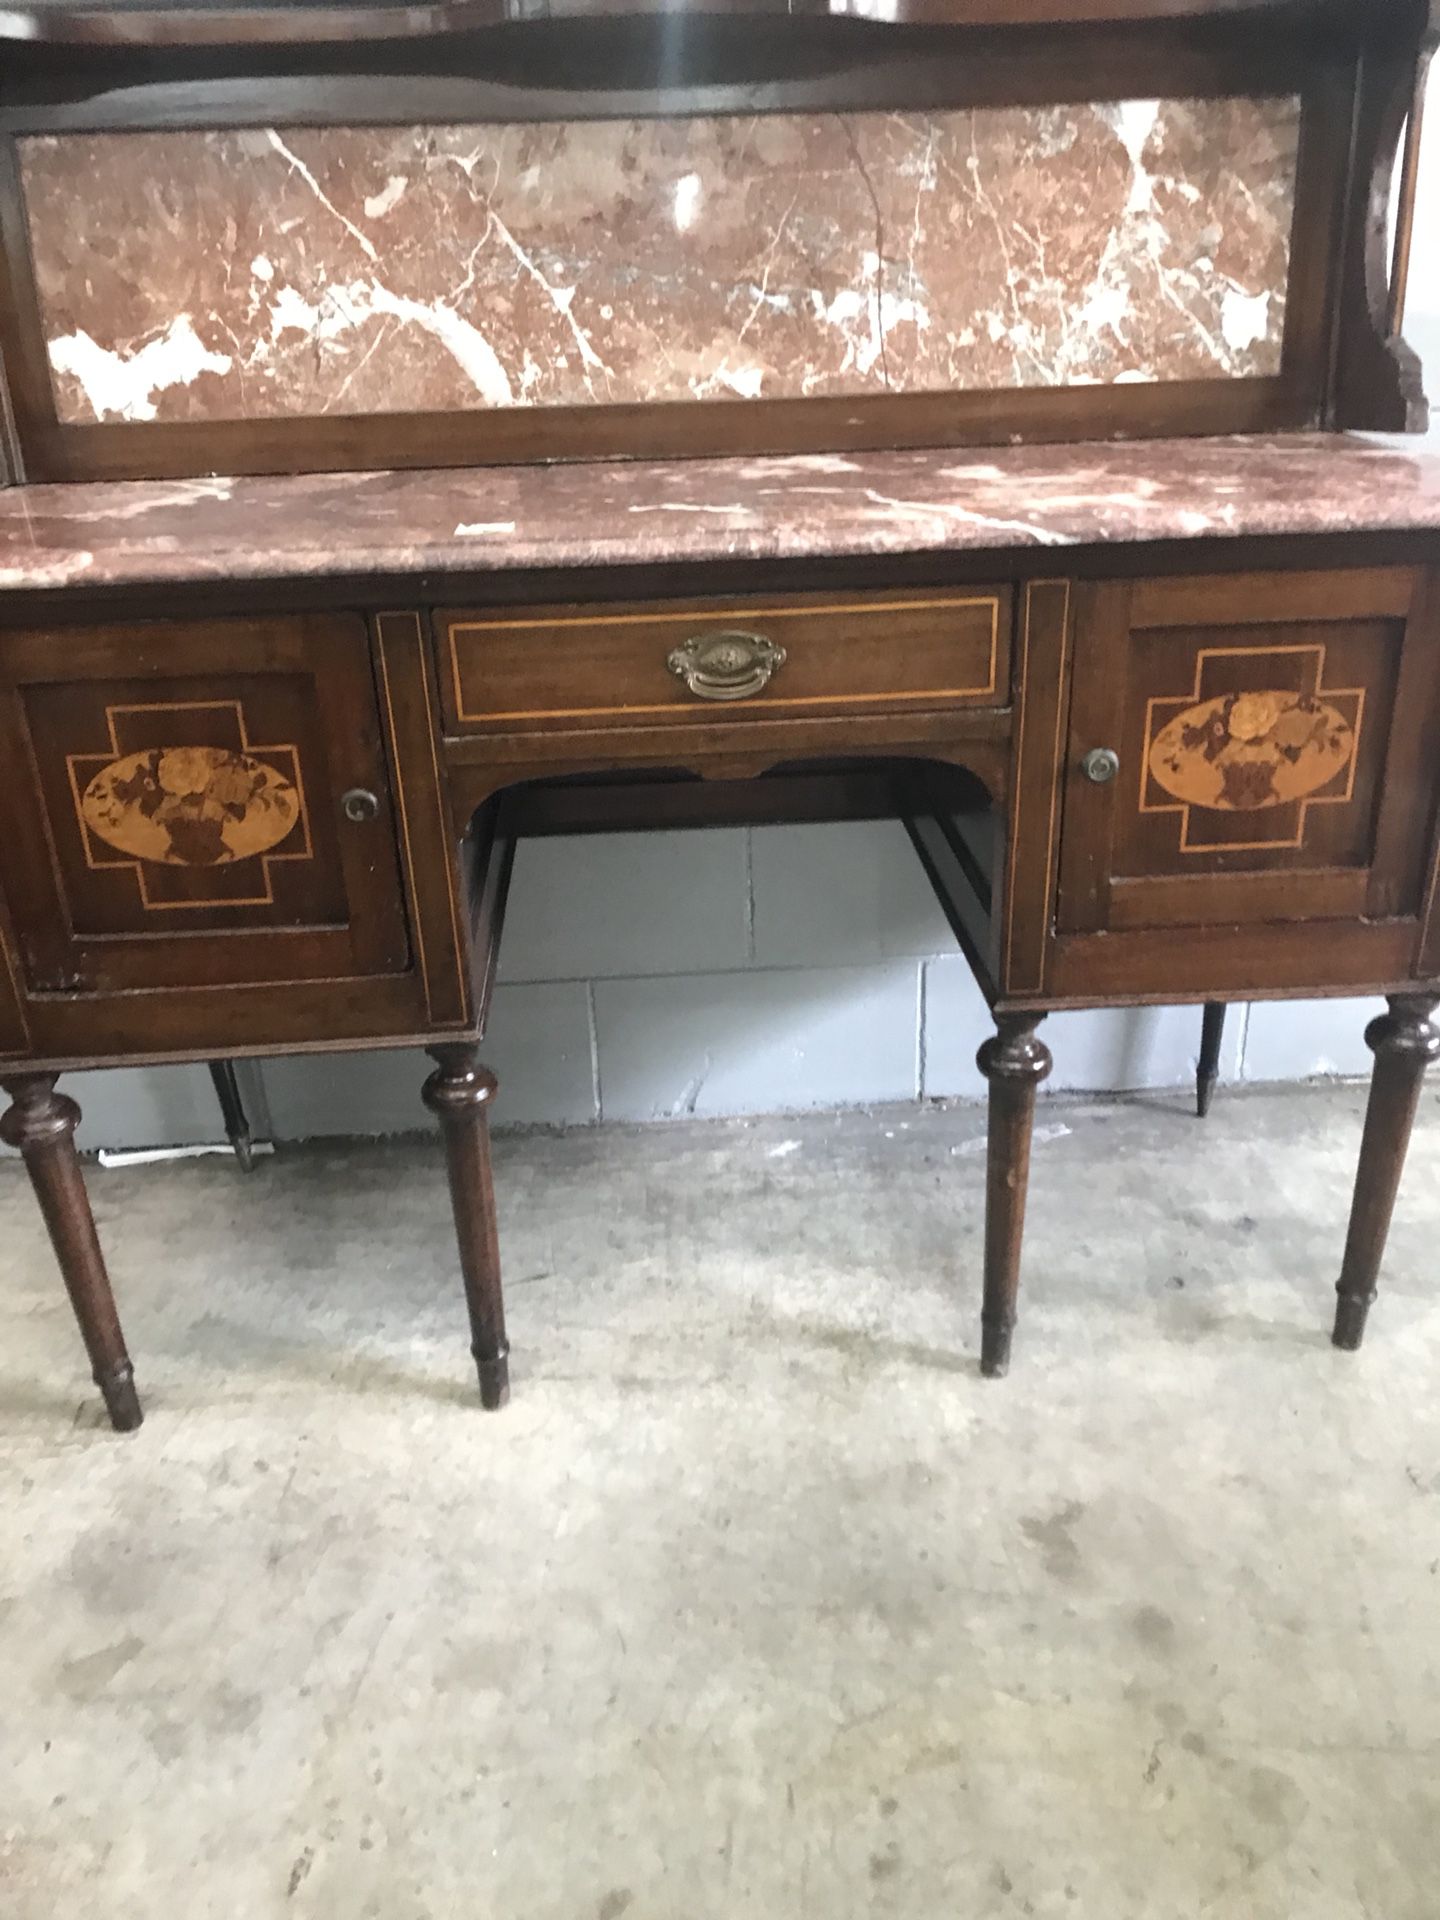 ok, Sideboard buffet or dresser, it's a beautiful antique piece, badge with gold trimming, could use a little TLC, if you want a custom paint job gi